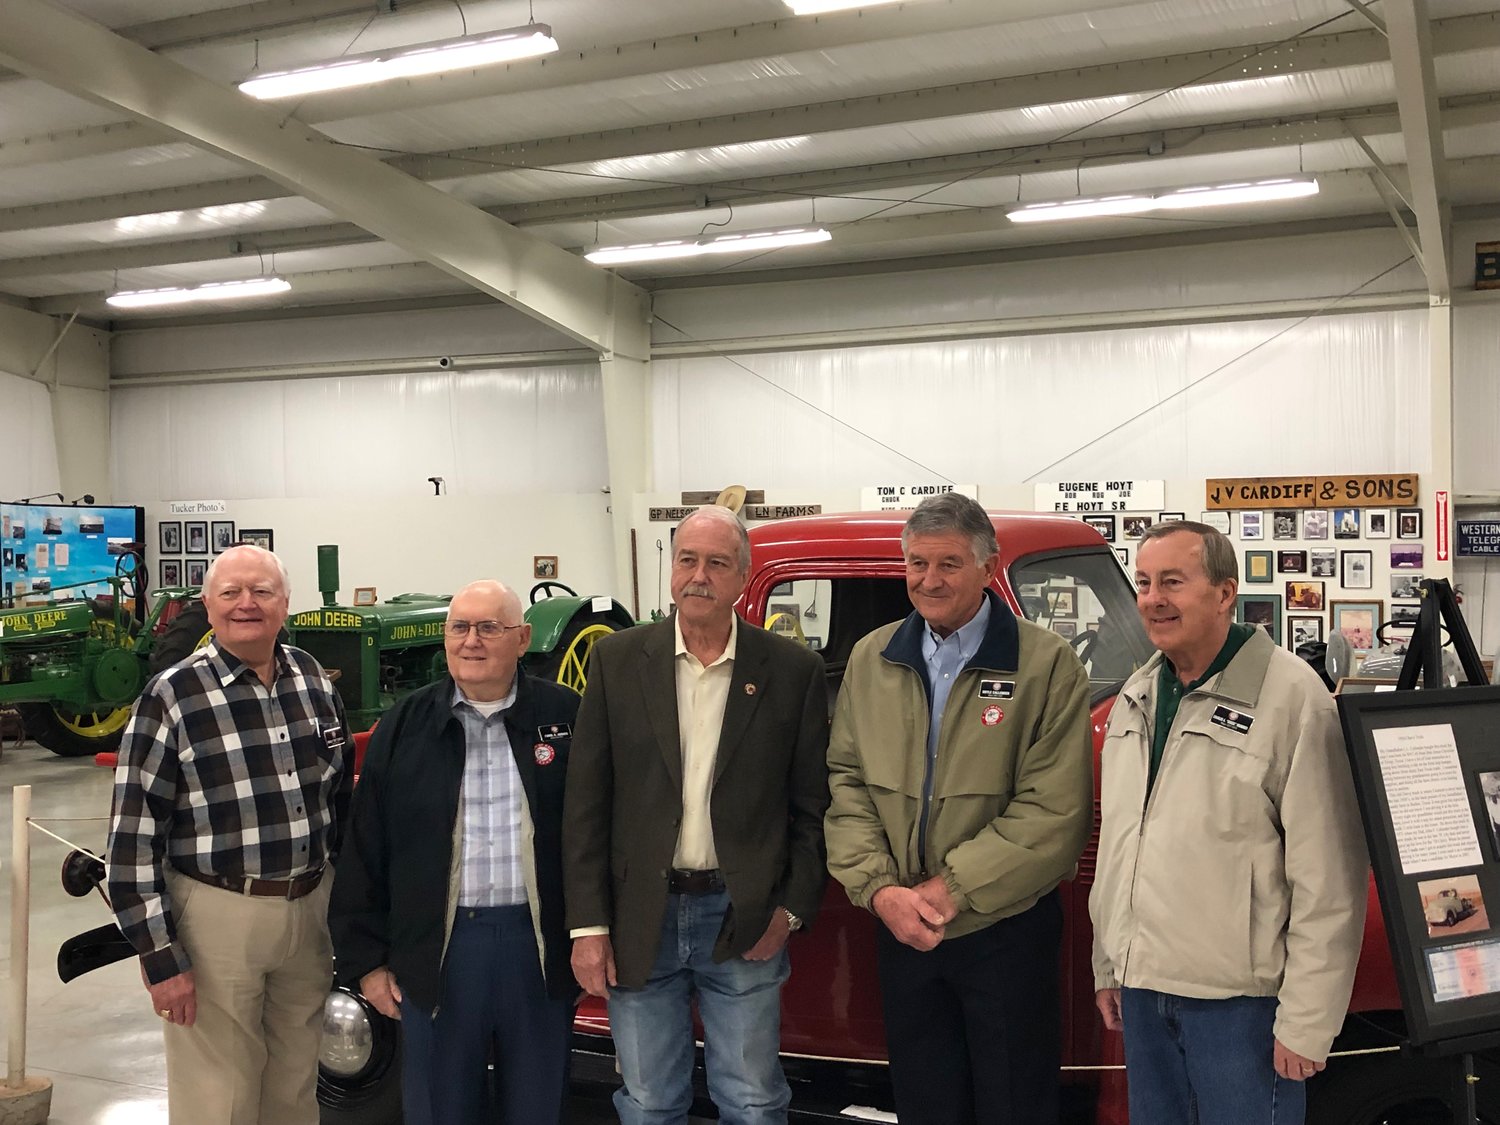 Katy mayors Don Elder Jr., Fabol Hughes, Bill Hastings, Doyle Callender, and Chuck Brawner pose at the Coffee with the Mayors event held Feb. 24 at the Johnny Nelson Katy Heritage Museum. Not pictured are former mayors Skip Conner and Hank Schmidt.